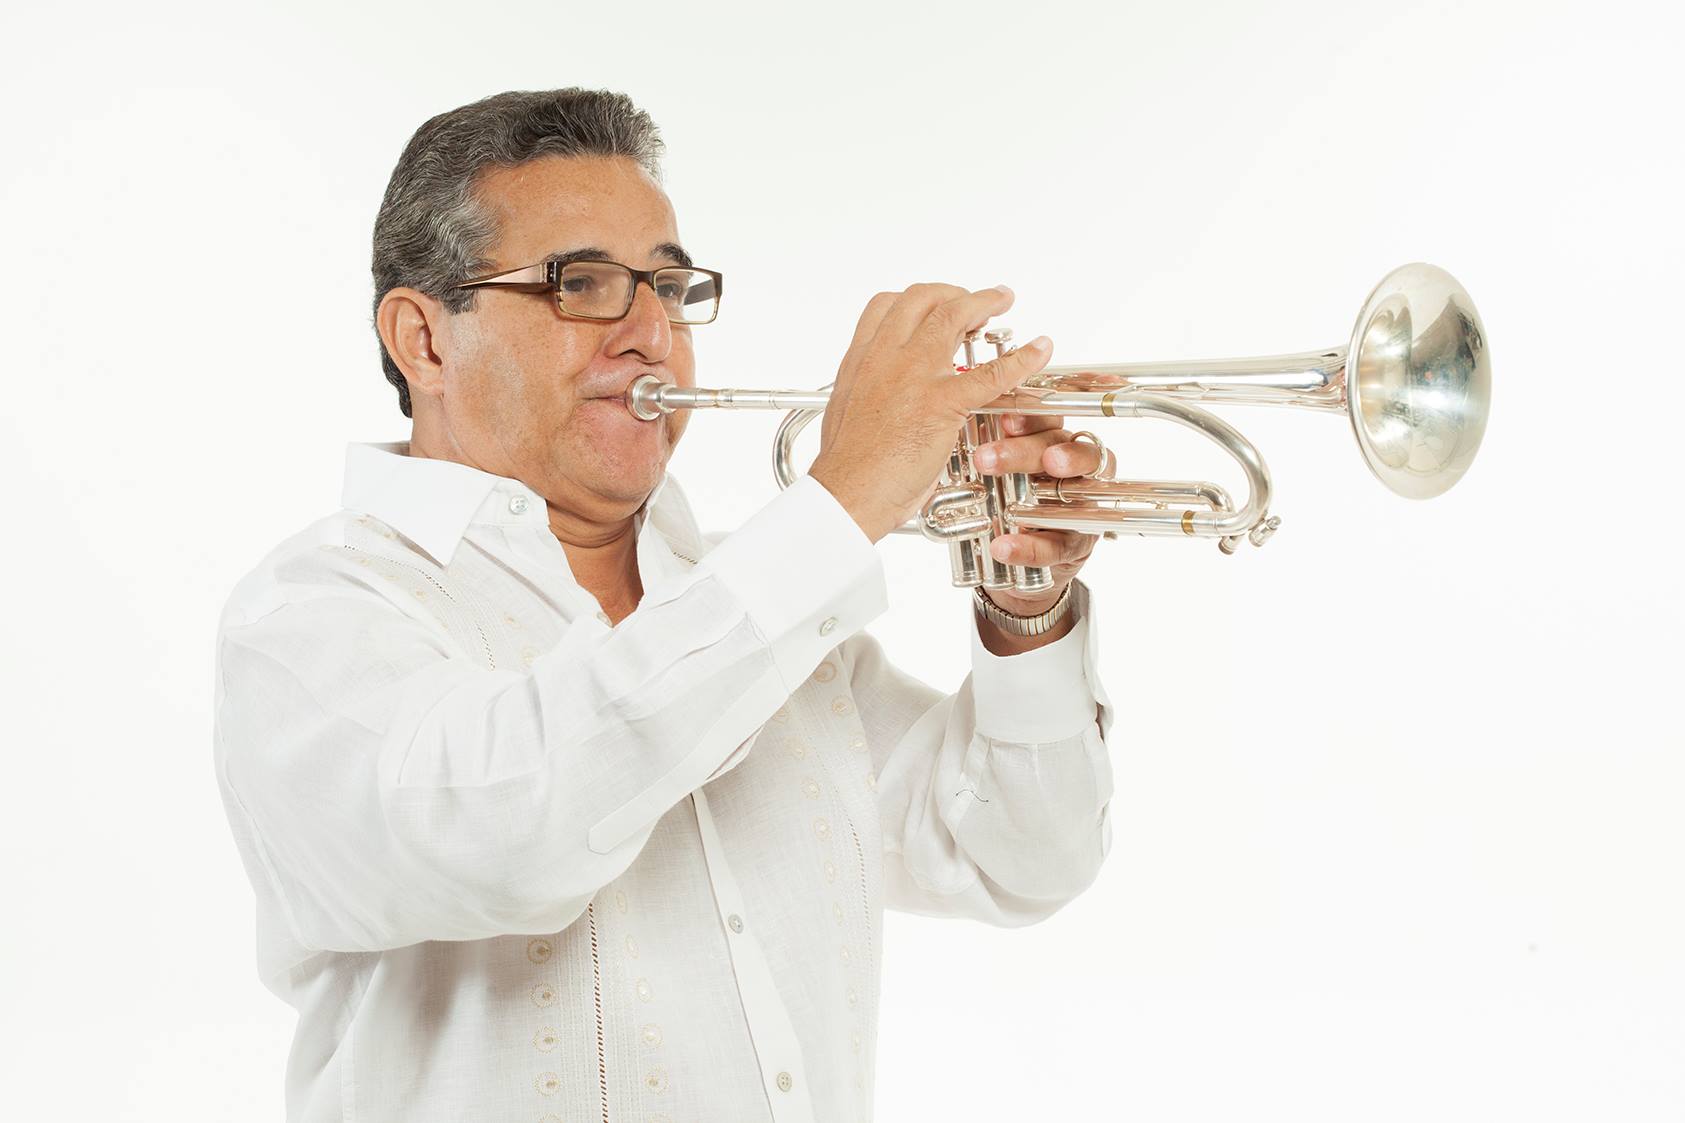 Perico Ortiz was a true child prodigy, whose vocation for music was awakened at the early age of five. He was trained at the Escuela Libre de Música and later at the San Juan Conservatory, later joining the Puerto Rico Symphony Orchestra under the direction of Pau Casals before he was 20 years old.